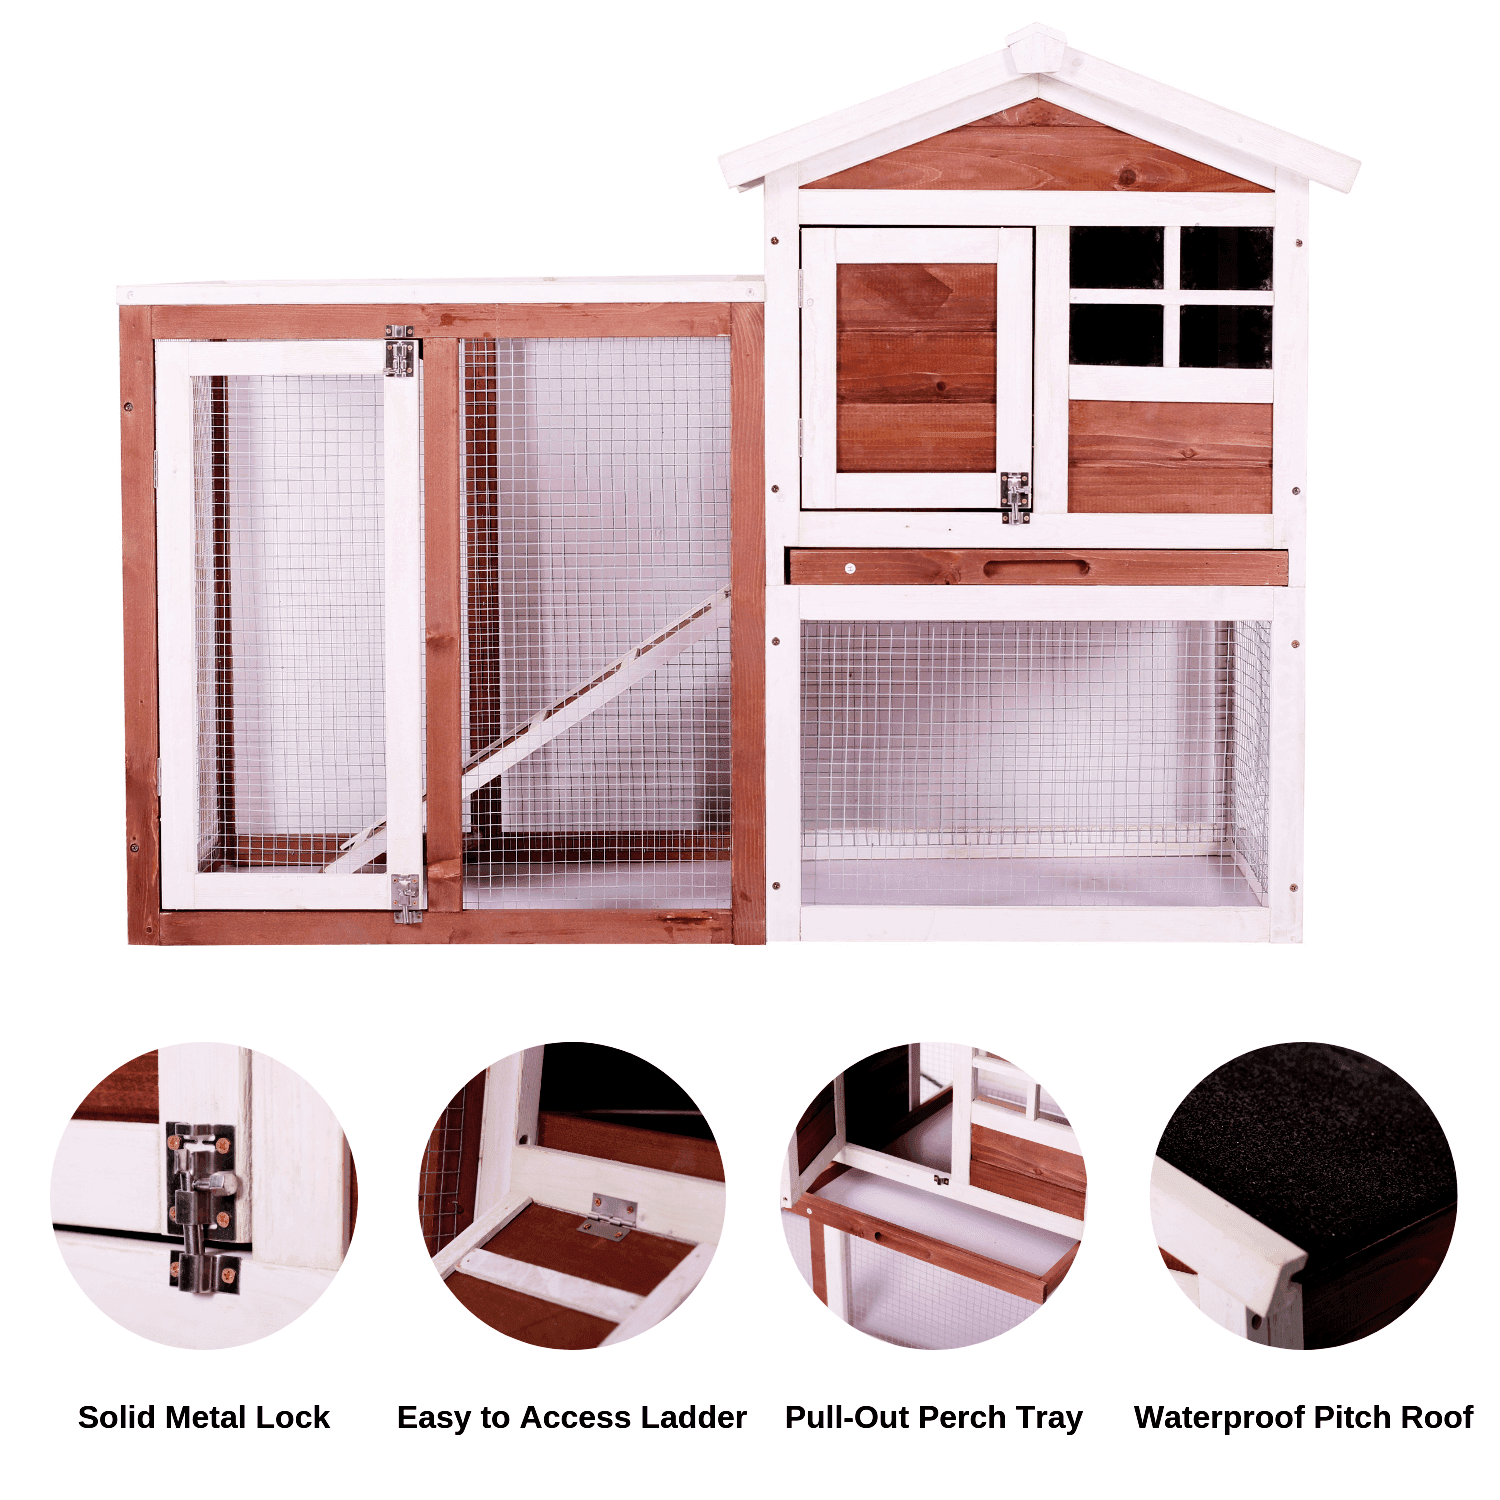 Fir Wood Chicken Coop,Outdoor Bunny Rabbit Hutch Hen Cage with Ventilation Door 2 Stroy Poultry House with Chicken Run for 3 Hens,Egg Box & Waterproof Roof,Removable Tray and Ramp 